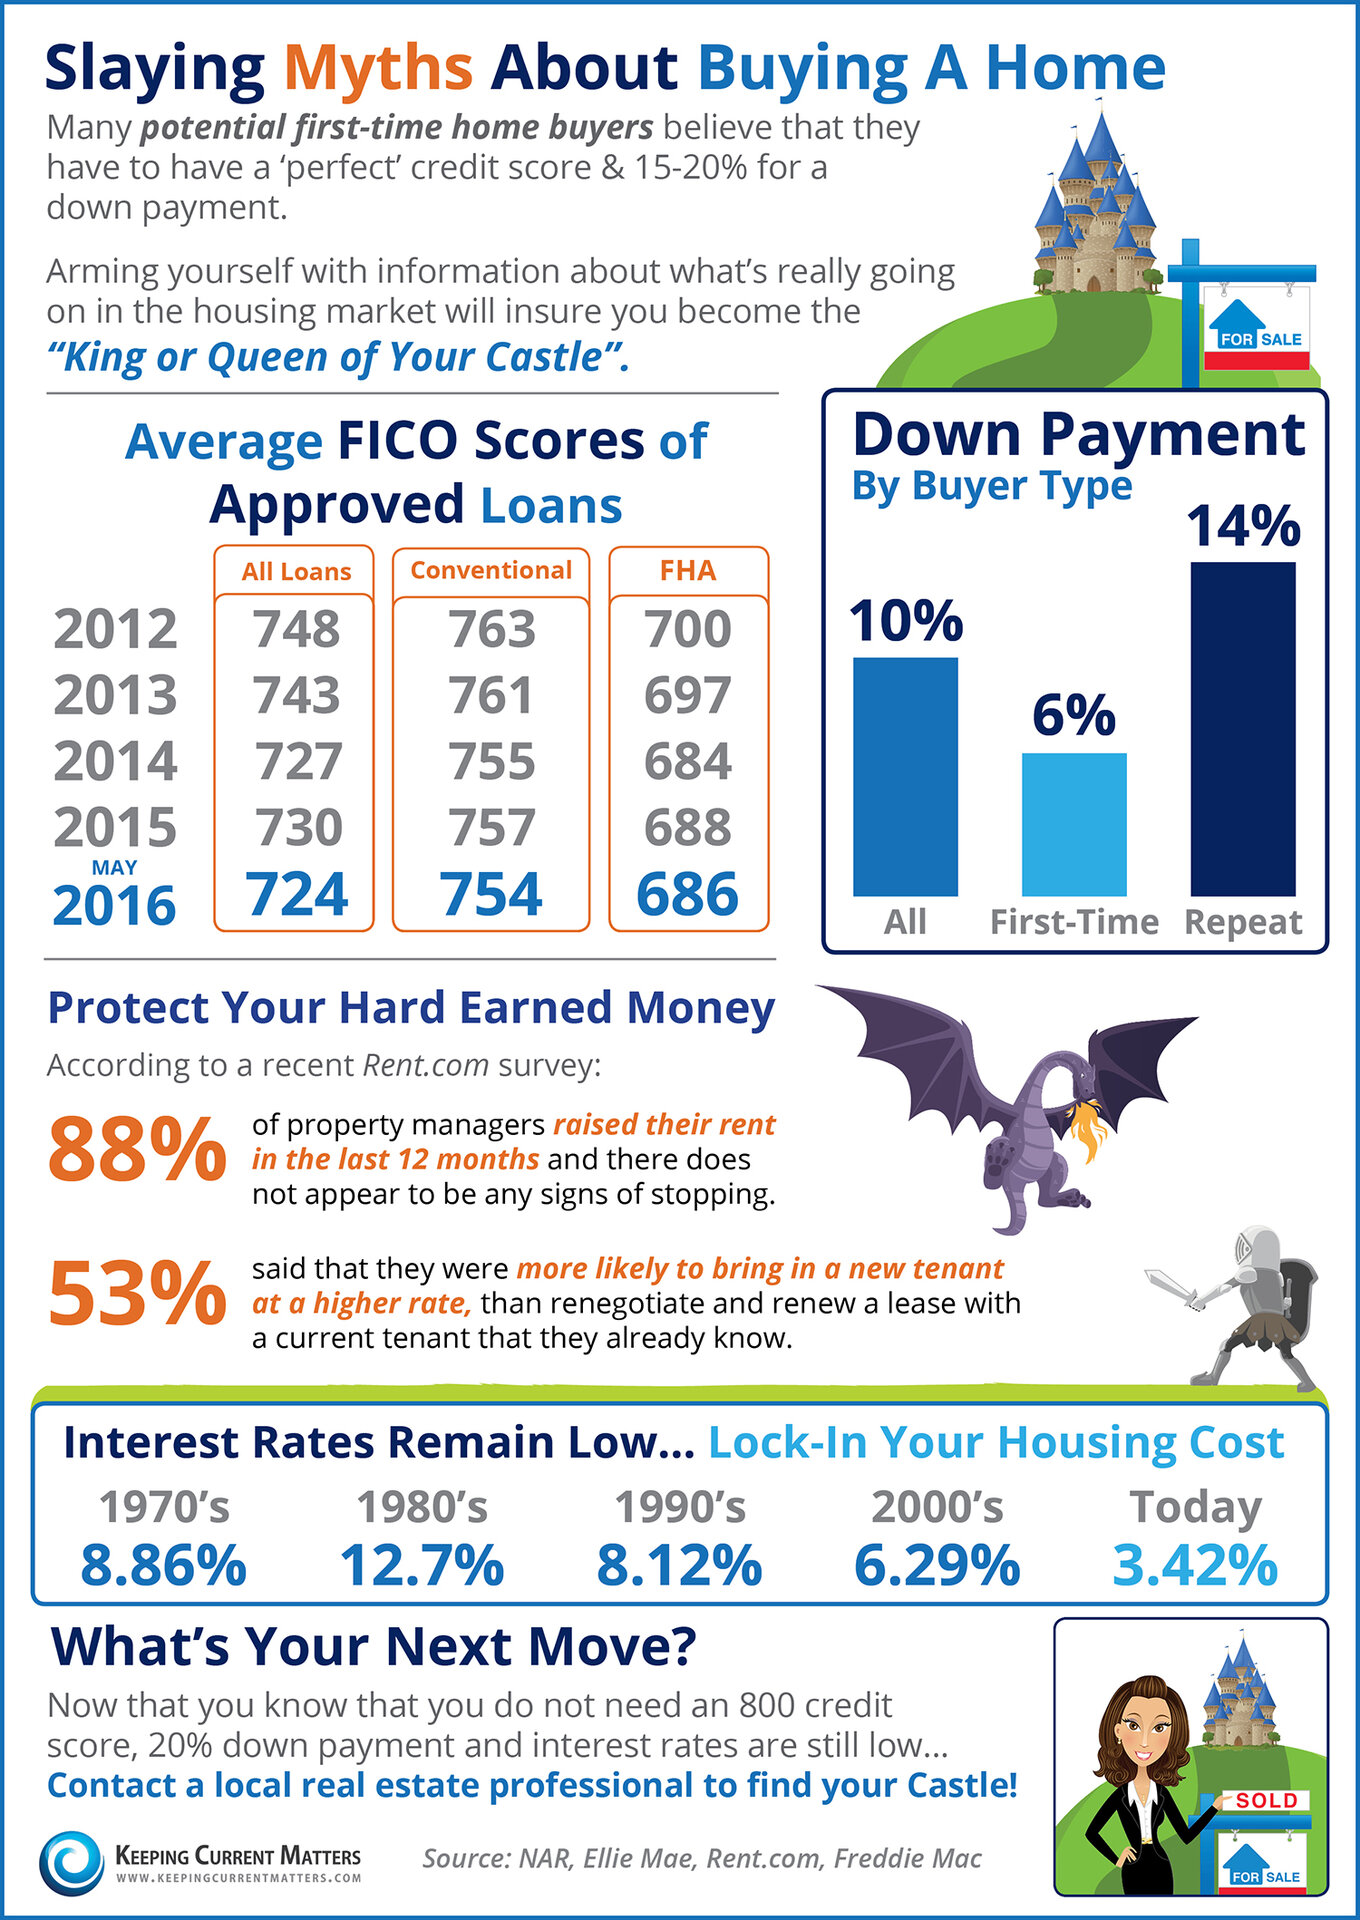 Slaying Myths About Home Buying [INFOGRAPHIC] | Keeping Current Matters